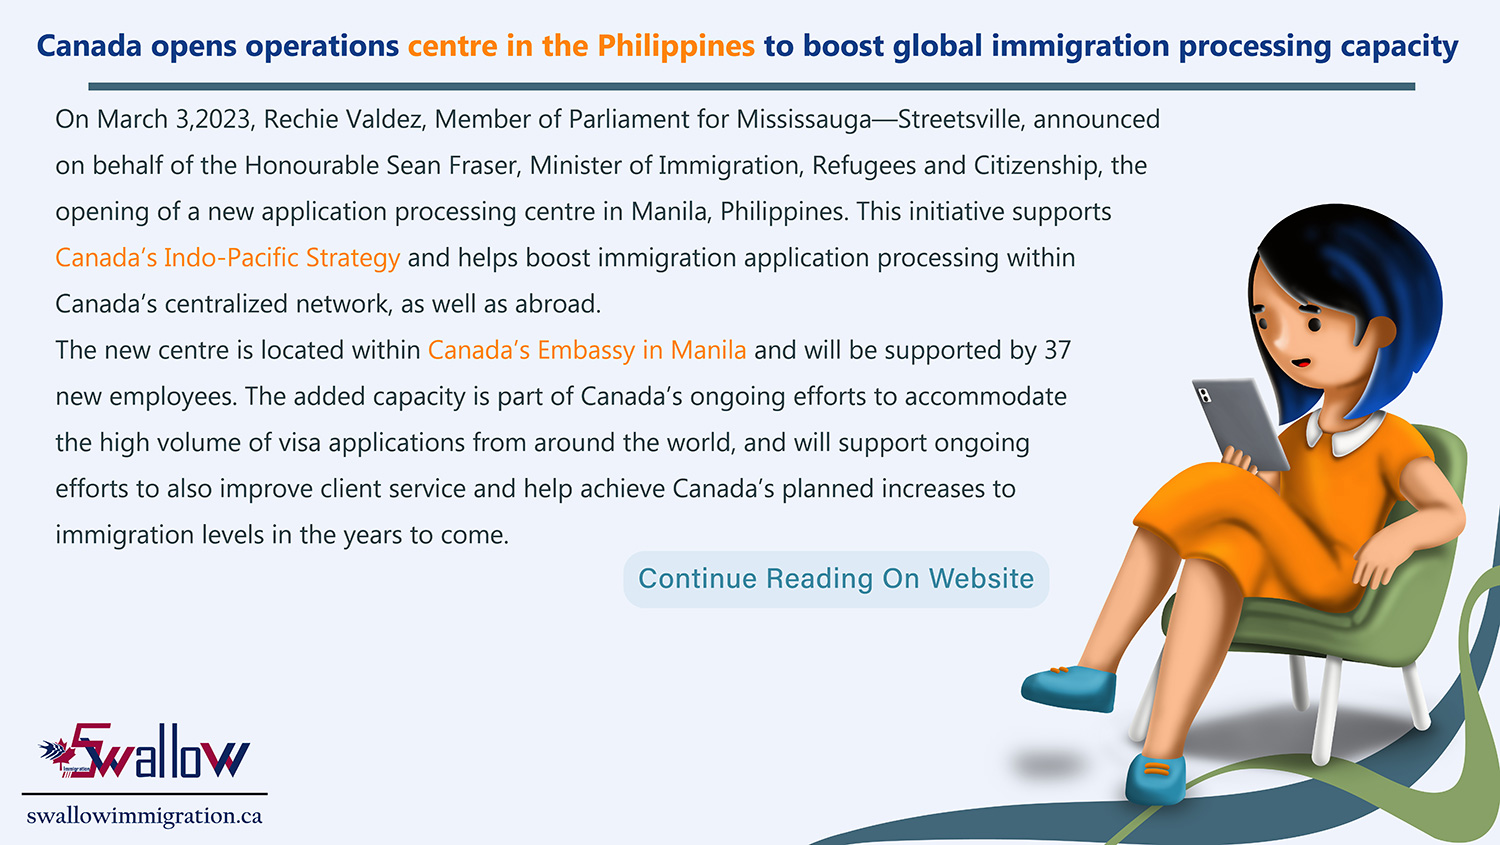 Canada opens operations centre in the Philippines to boost global immigration processing capacity